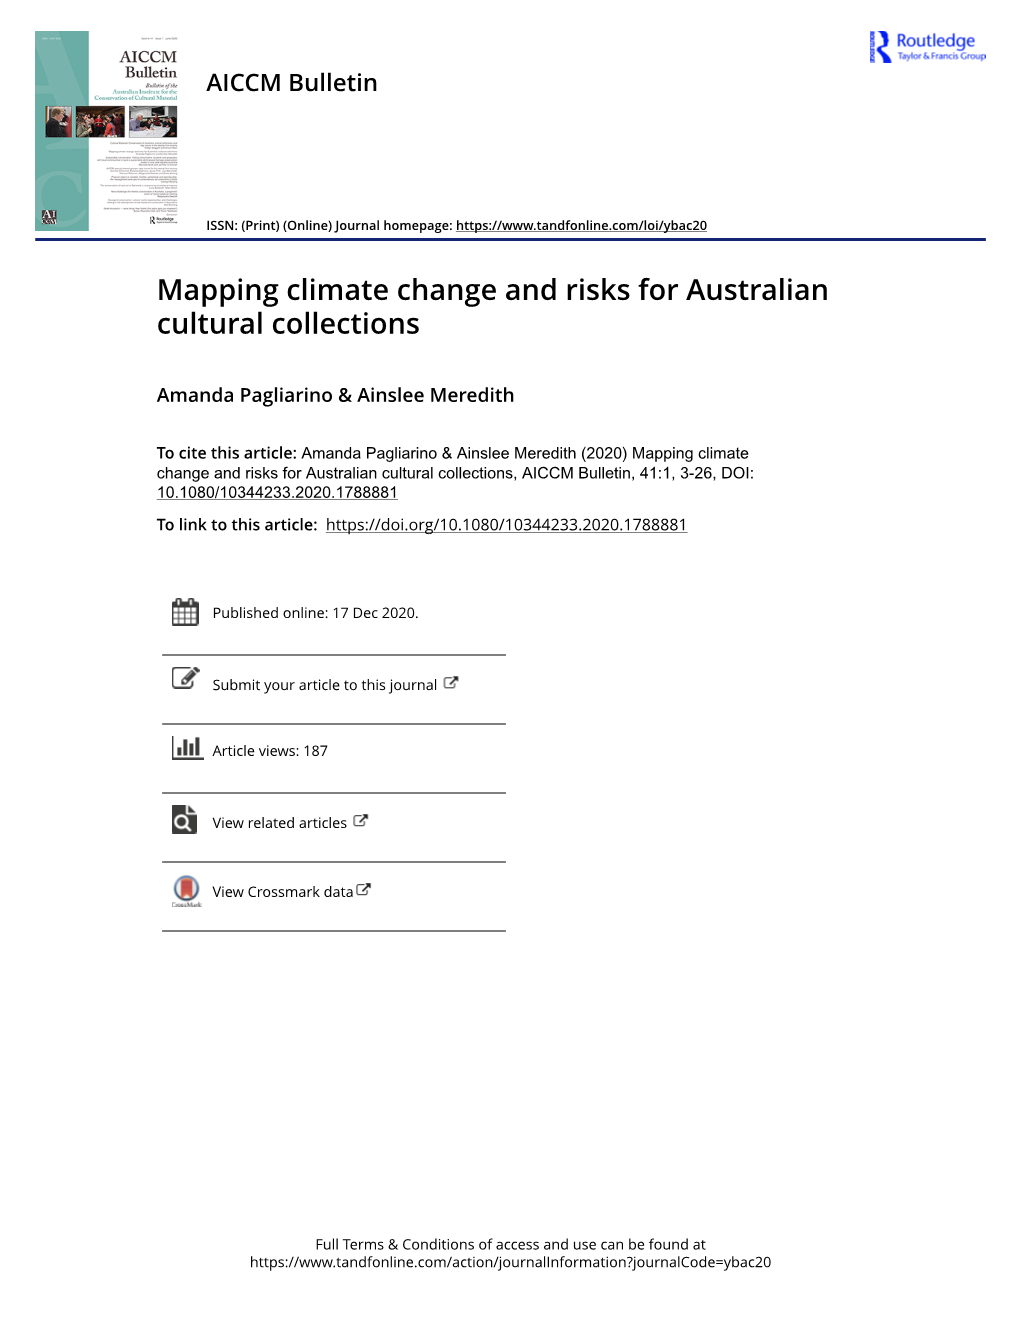 Mapping Climate Change and Risks for Australian Cultural Collections